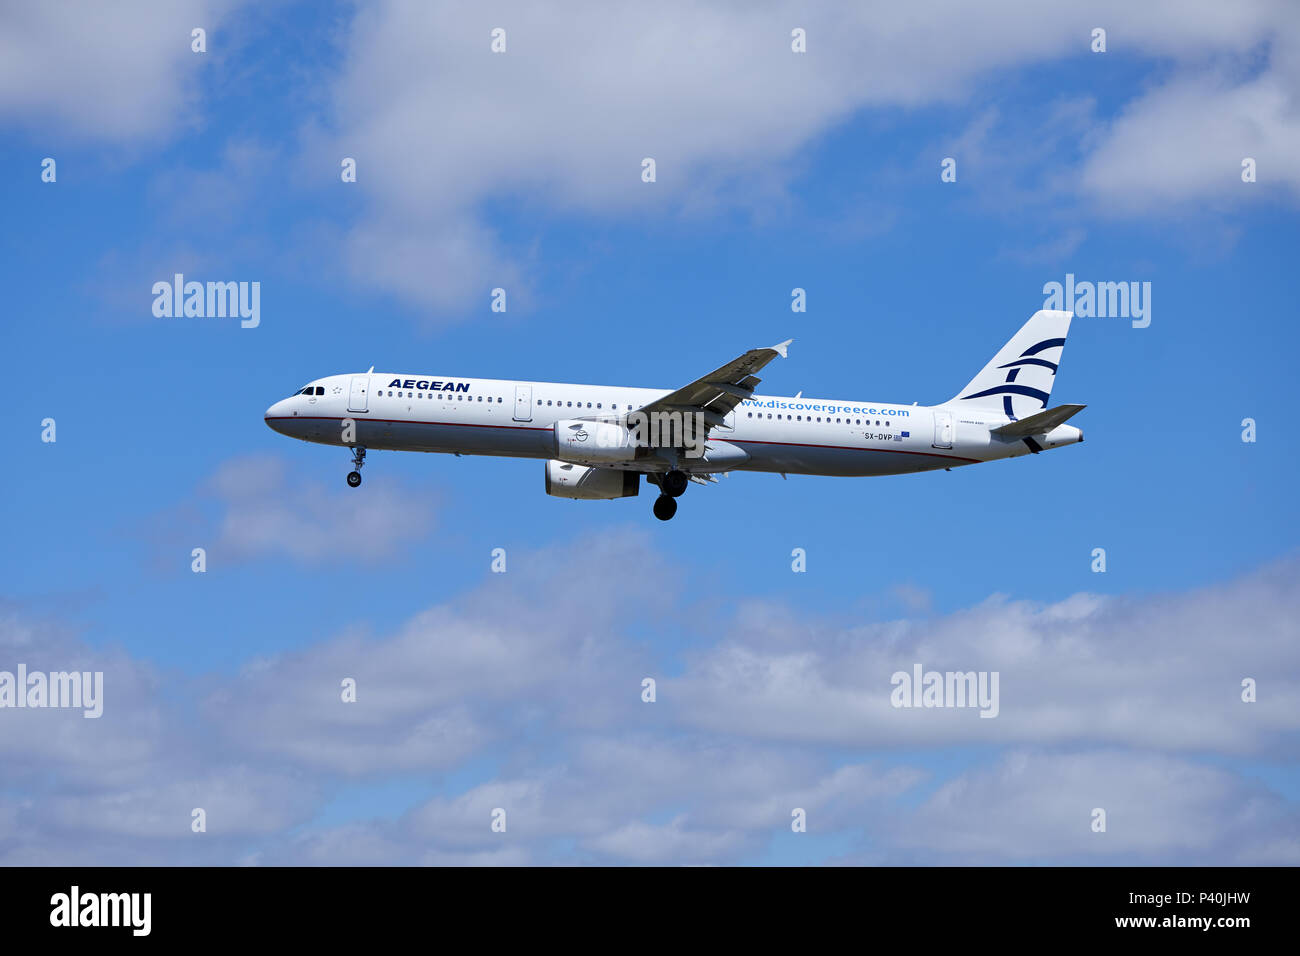 An Aegean Airlines Airbus A321-231 aircraft, registration number SX-DVP, approaching a landing. Stock Photo